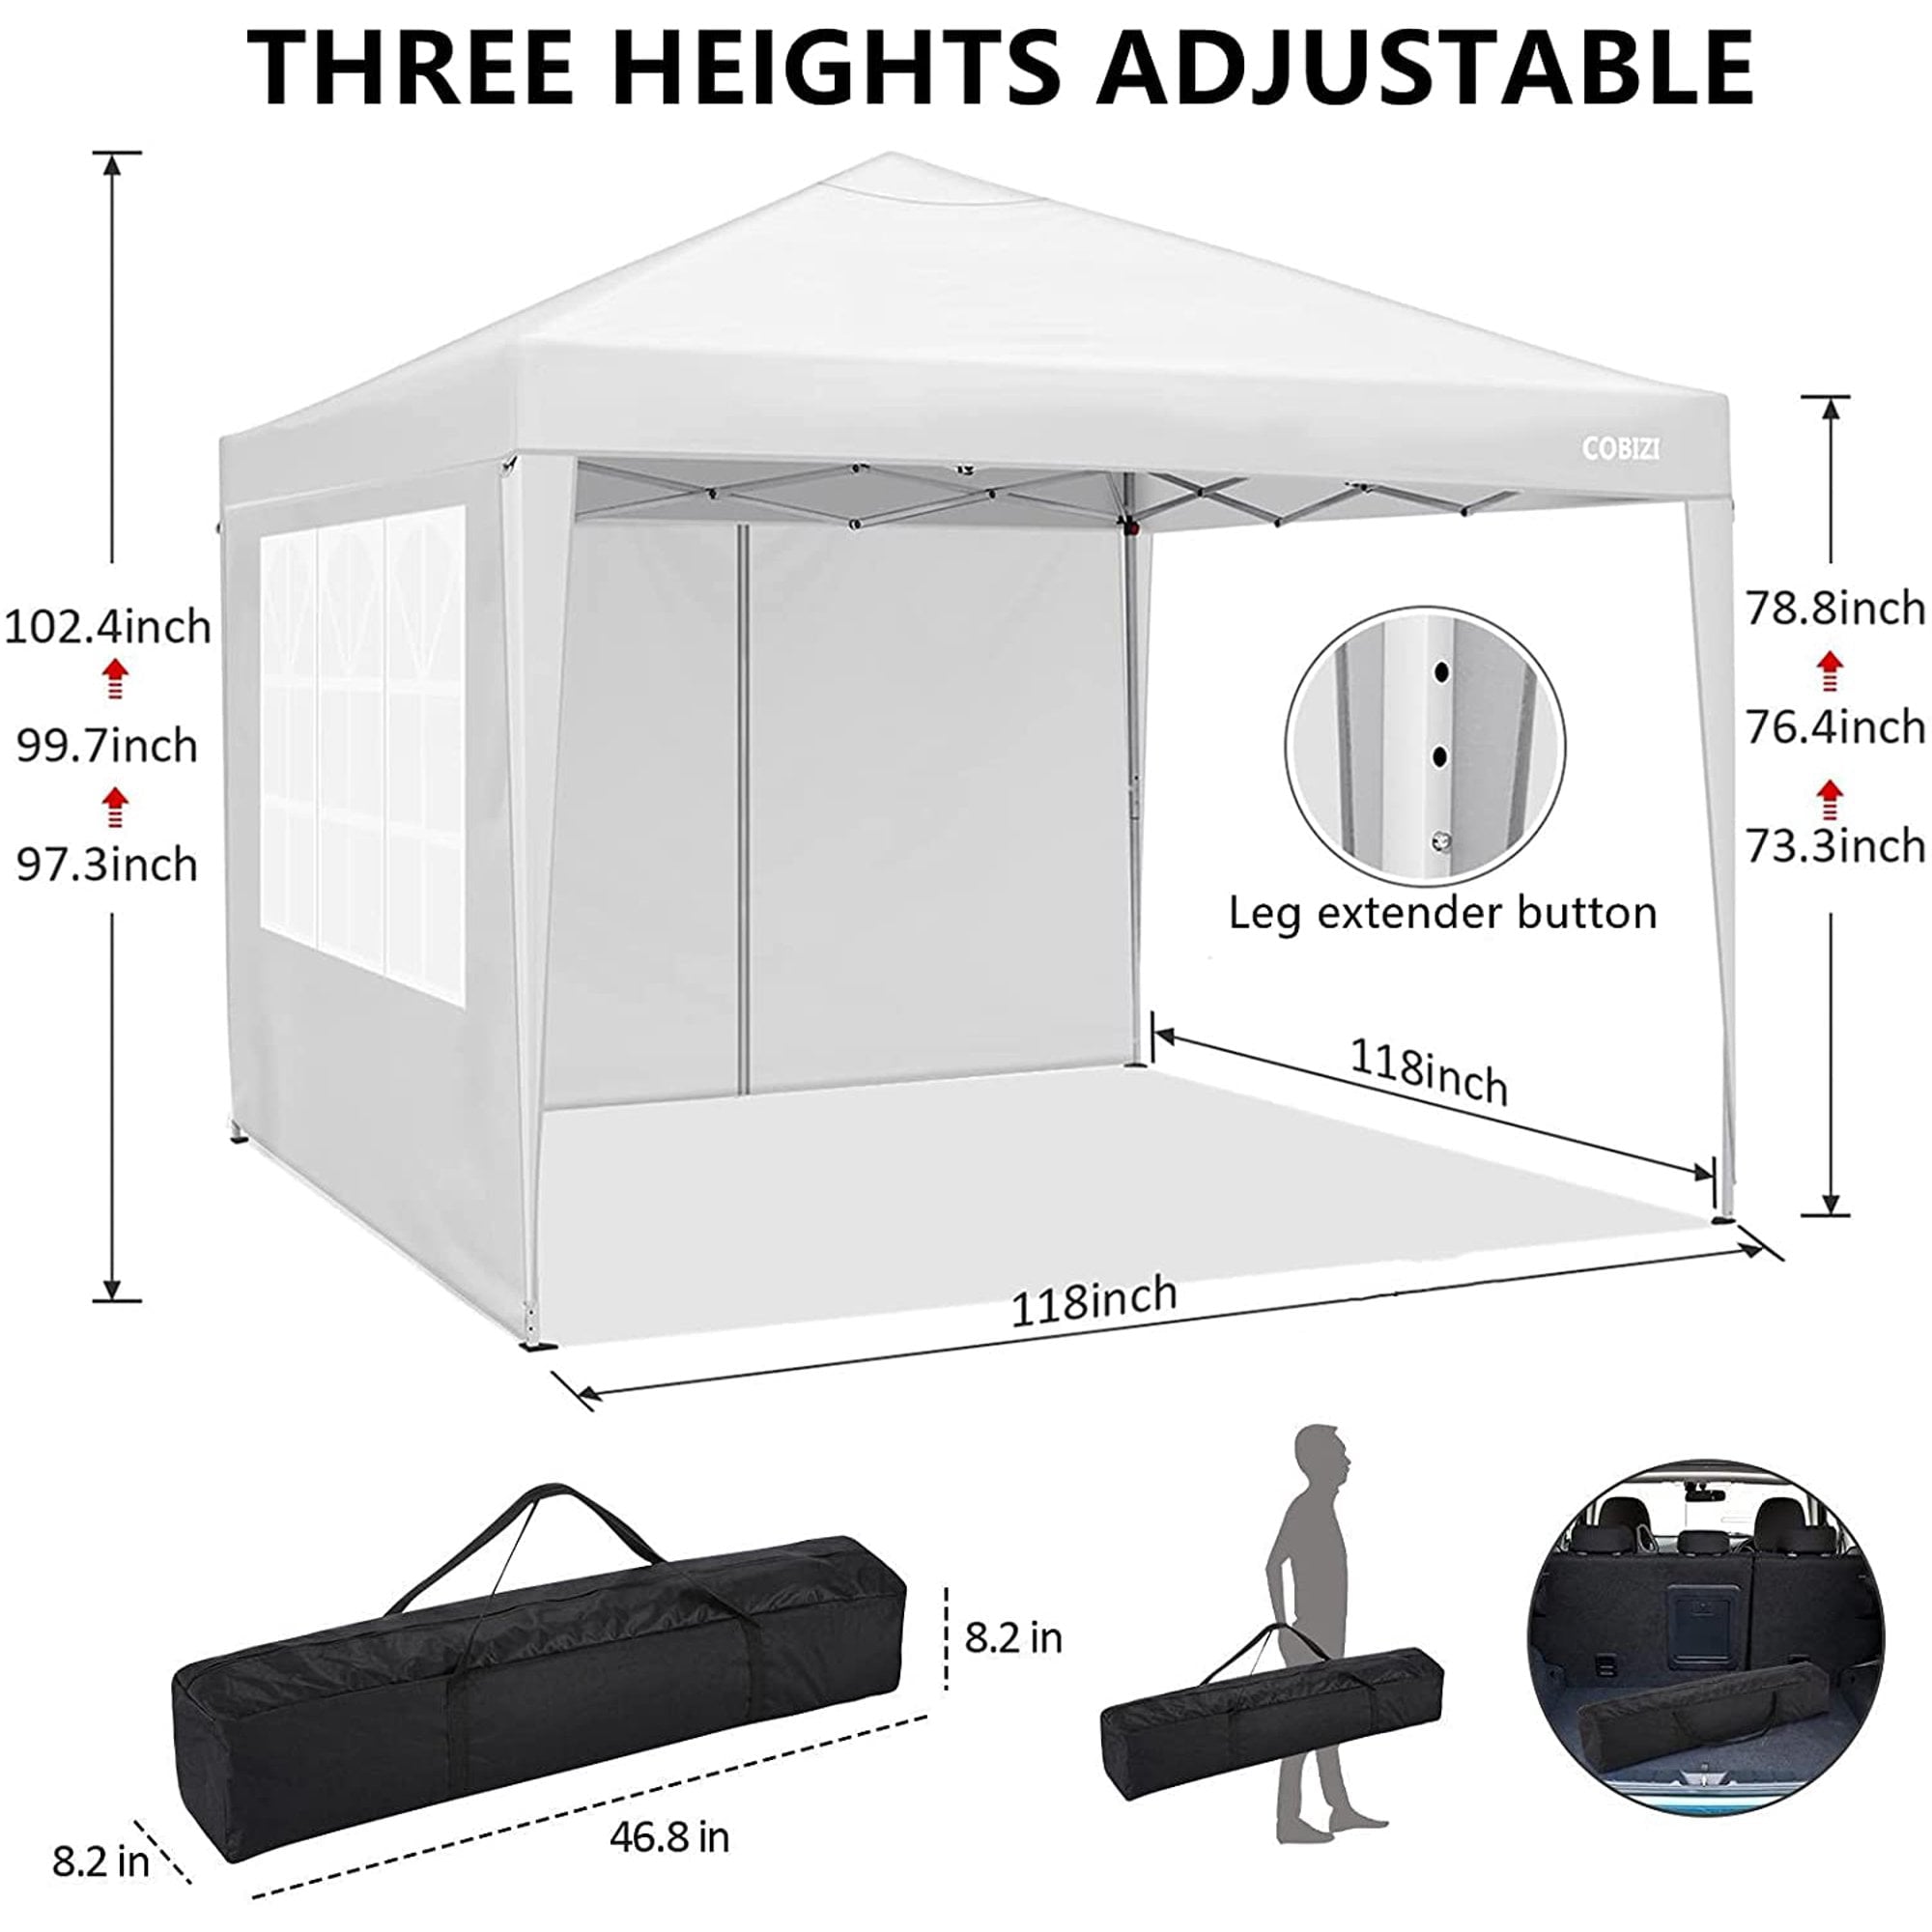 10 x 10ft Pop Up Canopy Tent Instant Outdoor Party Canopy Straight Leg Commercial Gazebo Tent Shelter with 4 Removable Sidewalls and Carrying Bag, White